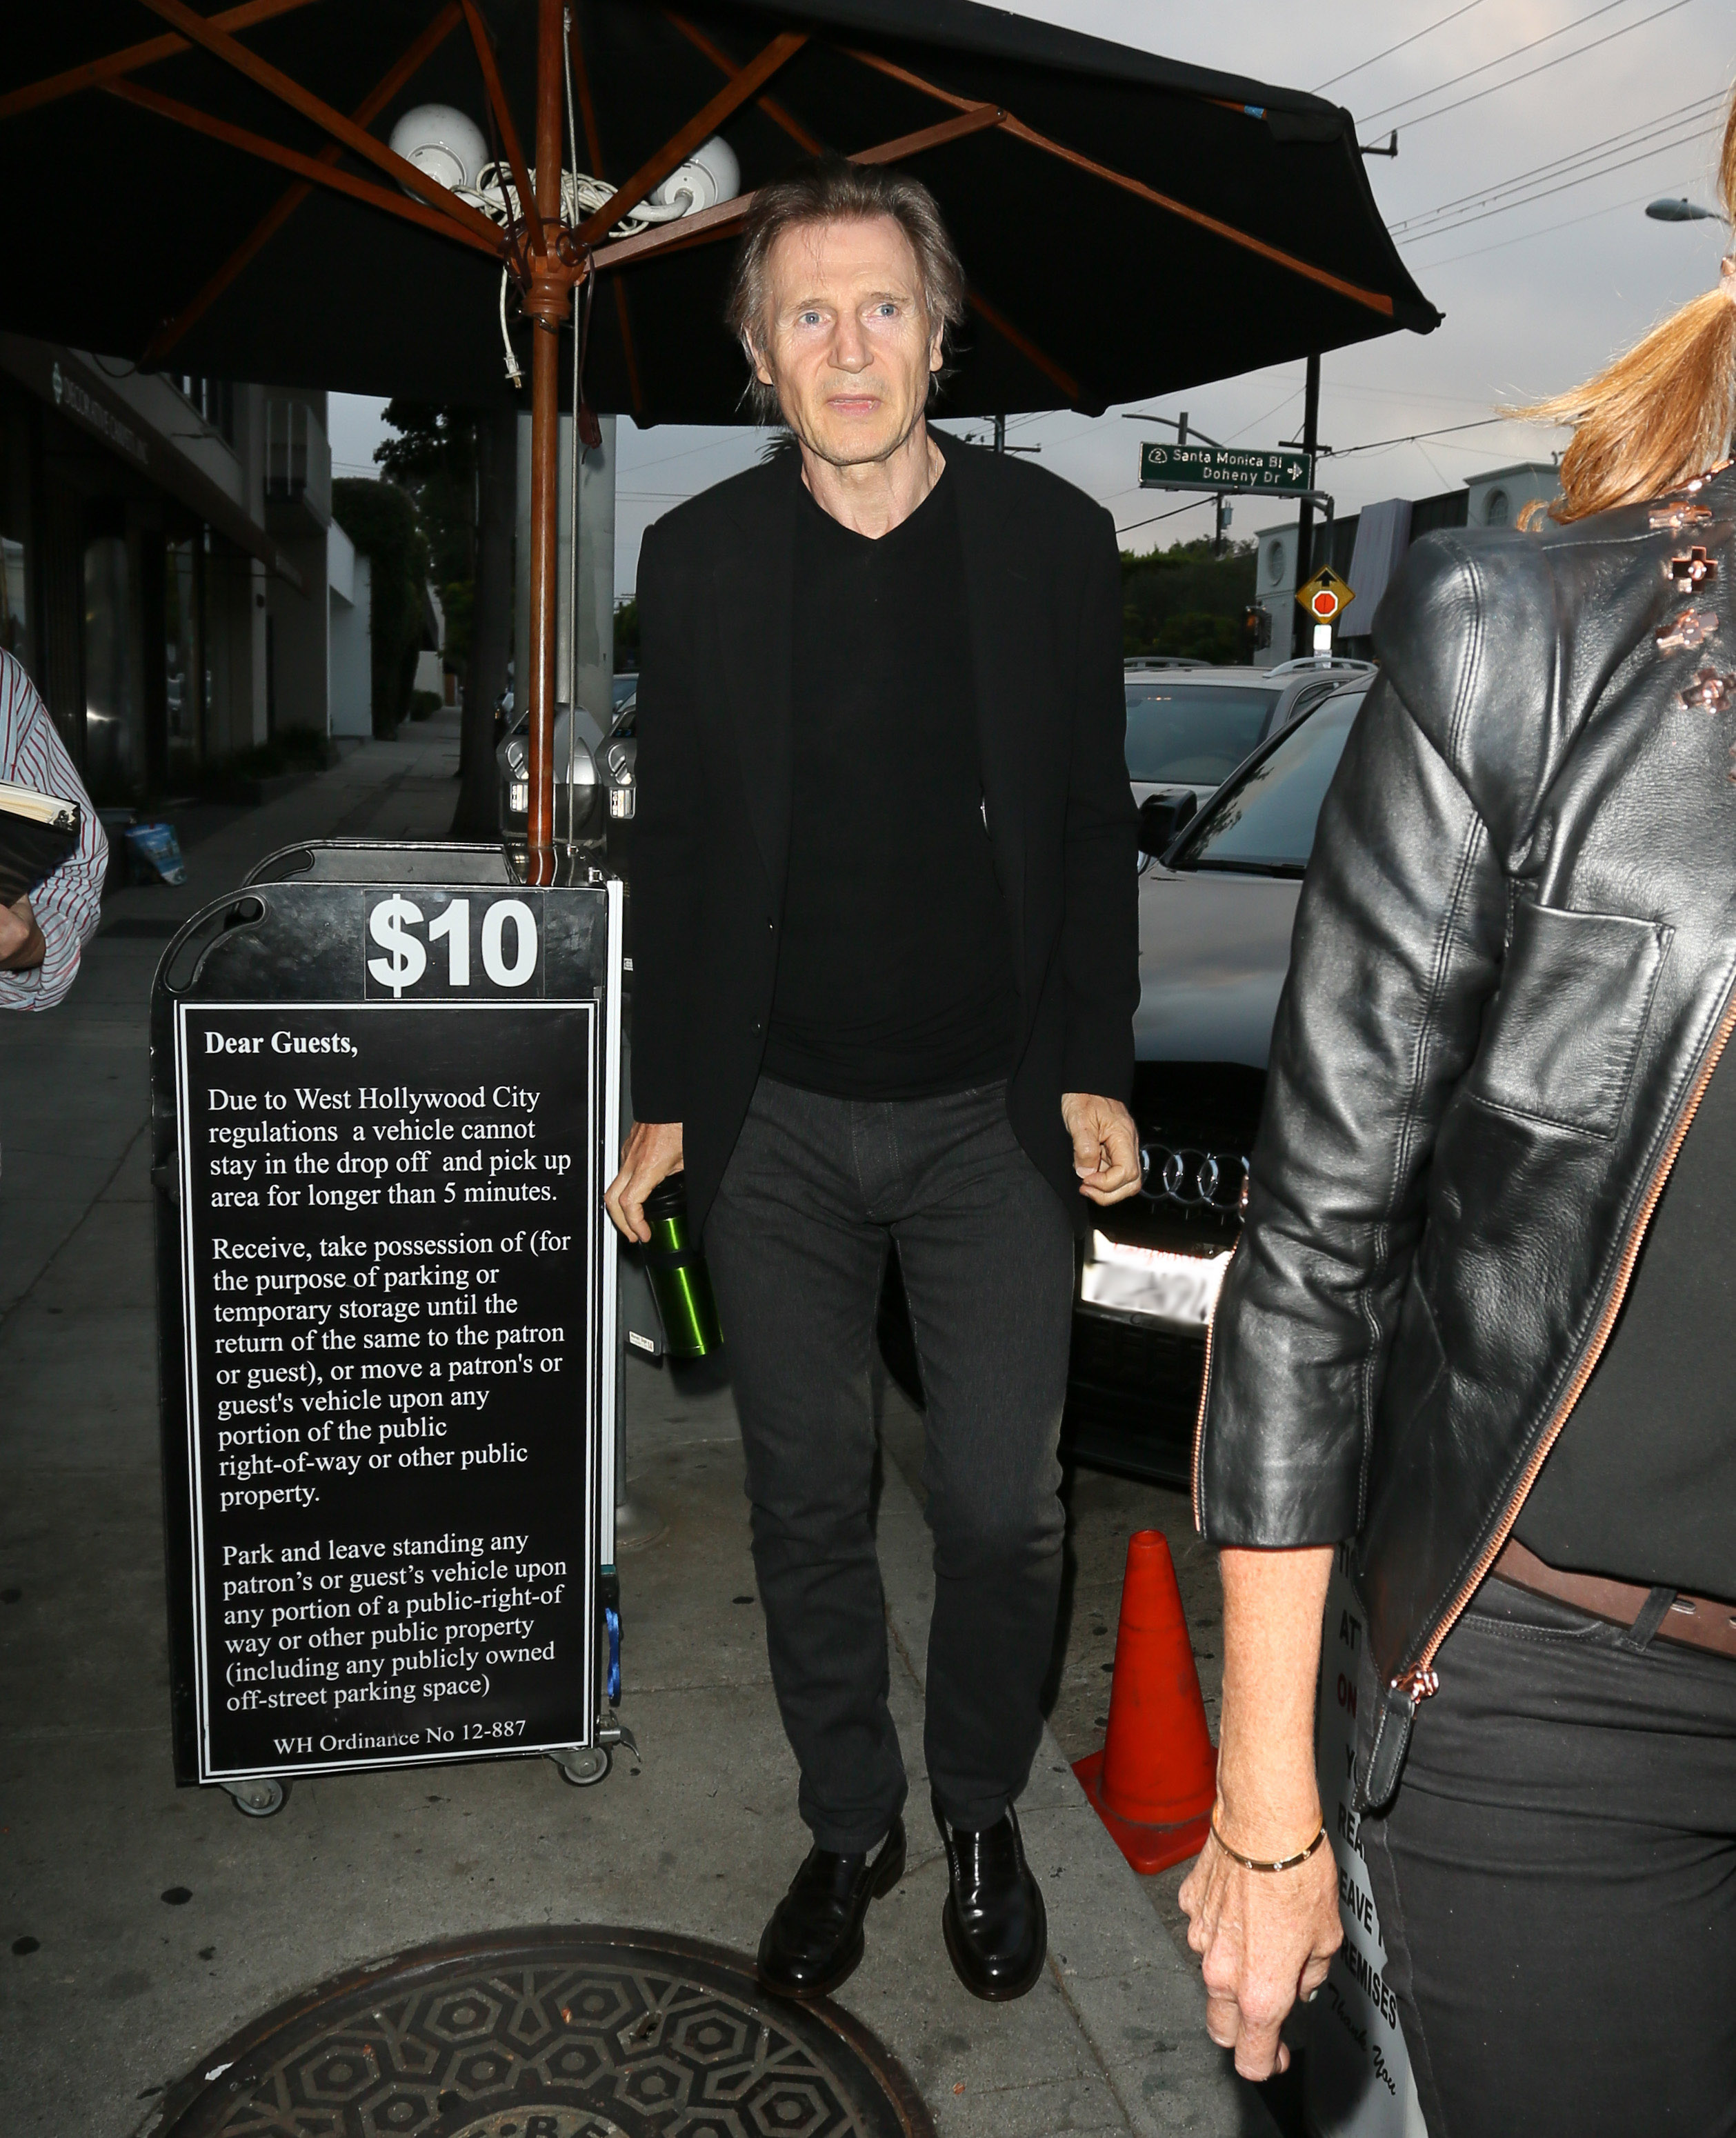 Liam Neeson arrives for dinner at Craig's restaurant in Hollywood on June 08, 2015 in Los Angeles, California. | Source: Getty Images